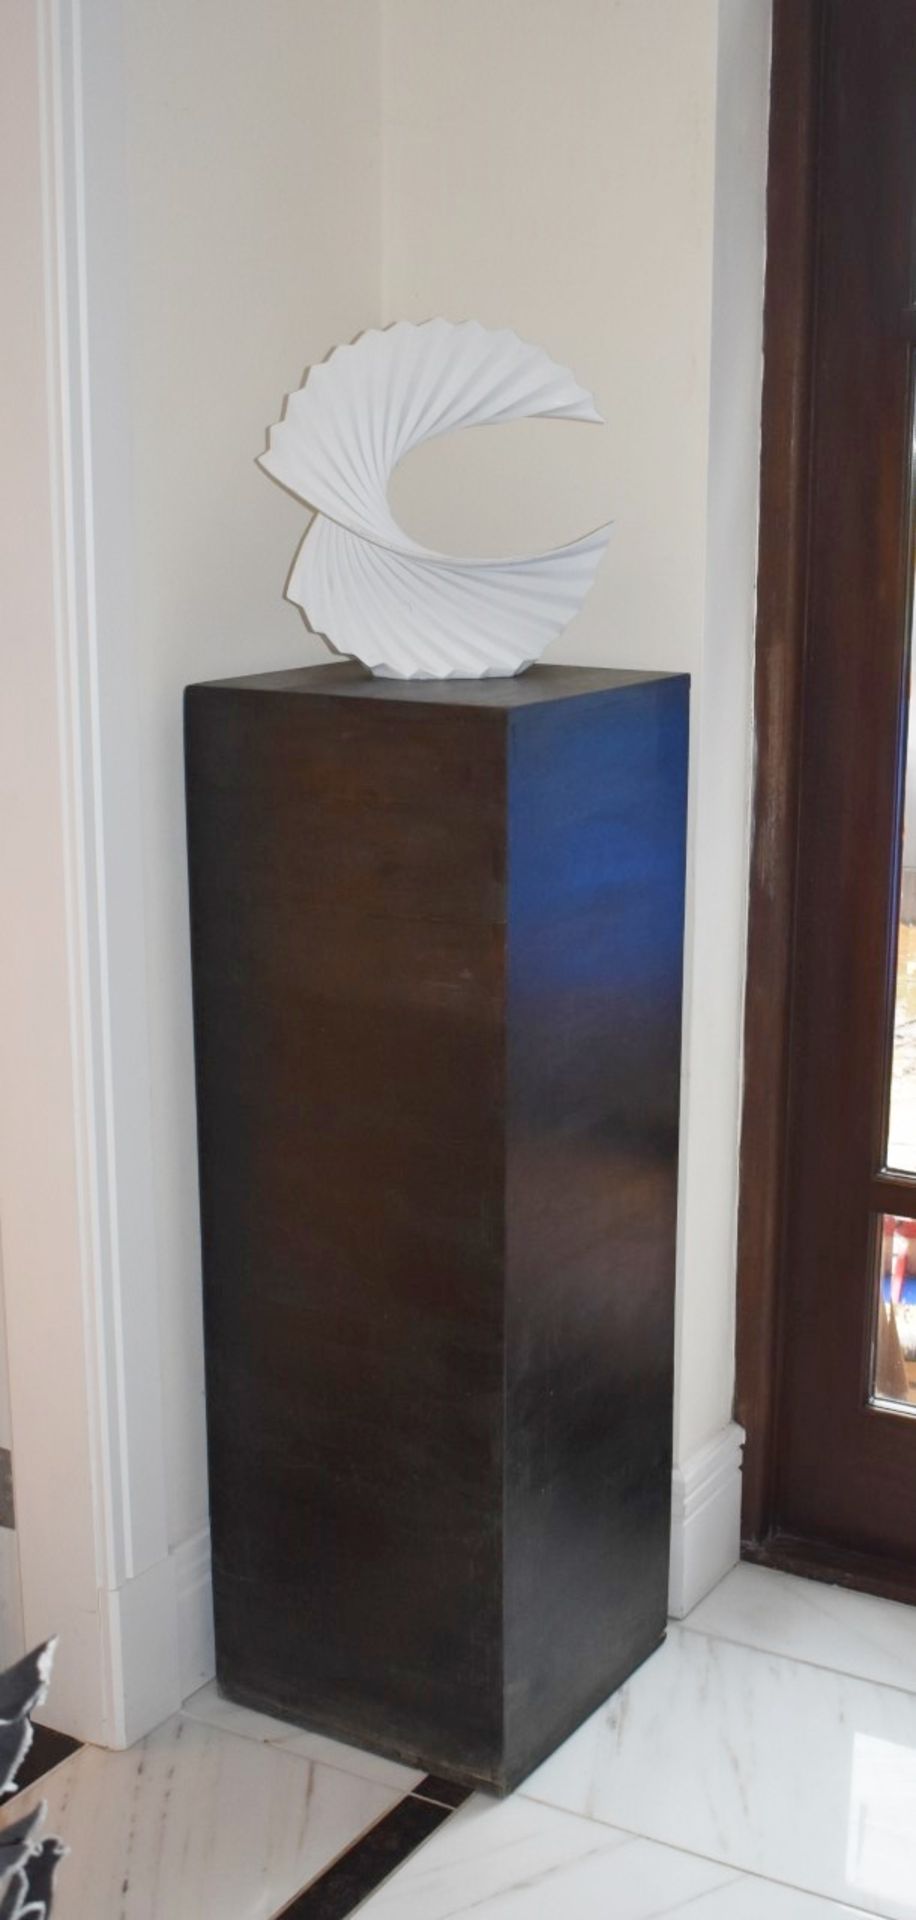 Pair of Tall Wooden Gallery Display Plinths With a Dark Wooden Finish - Ideal For The home, Art - Image 3 of 3